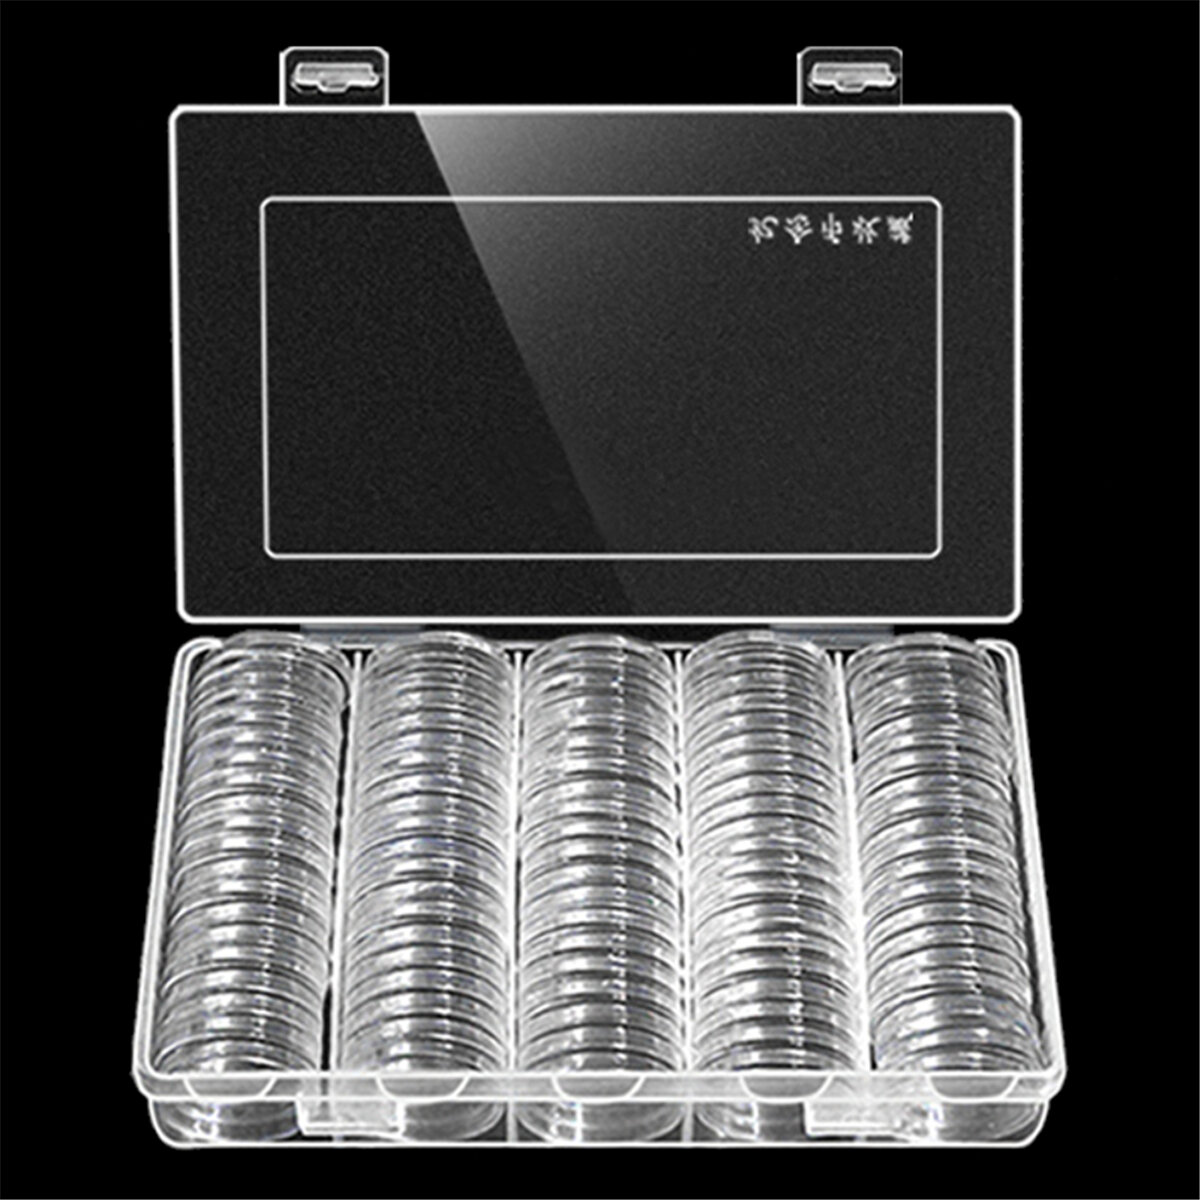 Coins Holder Storage Box Hold 100Pcs 30mm Round Coins Boxes Plastic Protector